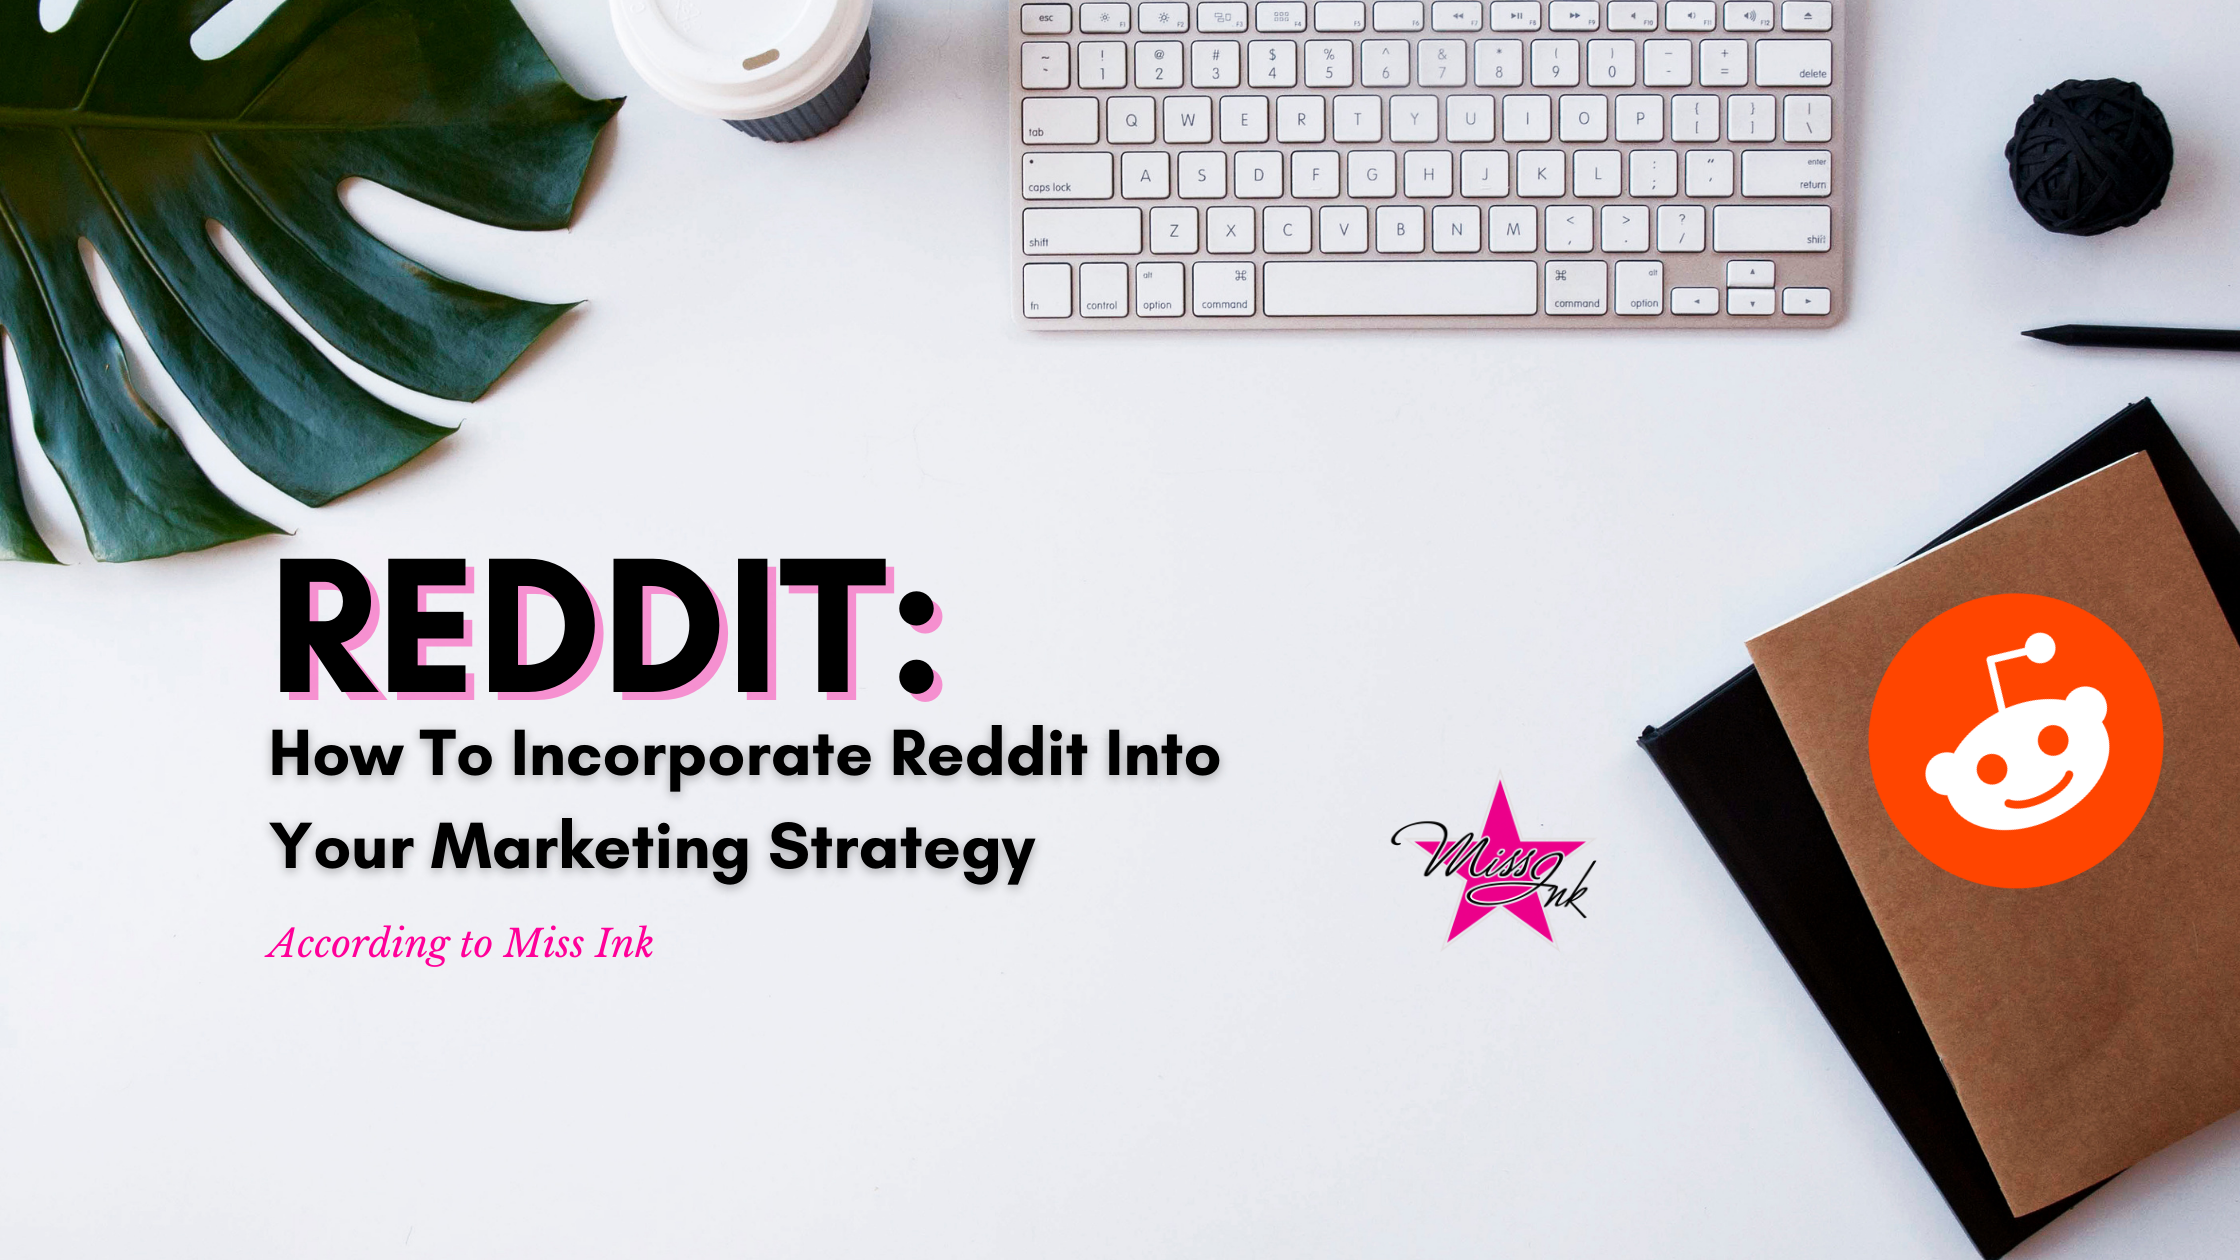 Reddit: How To Incorporate Reddit Into Your Marketing Strategy